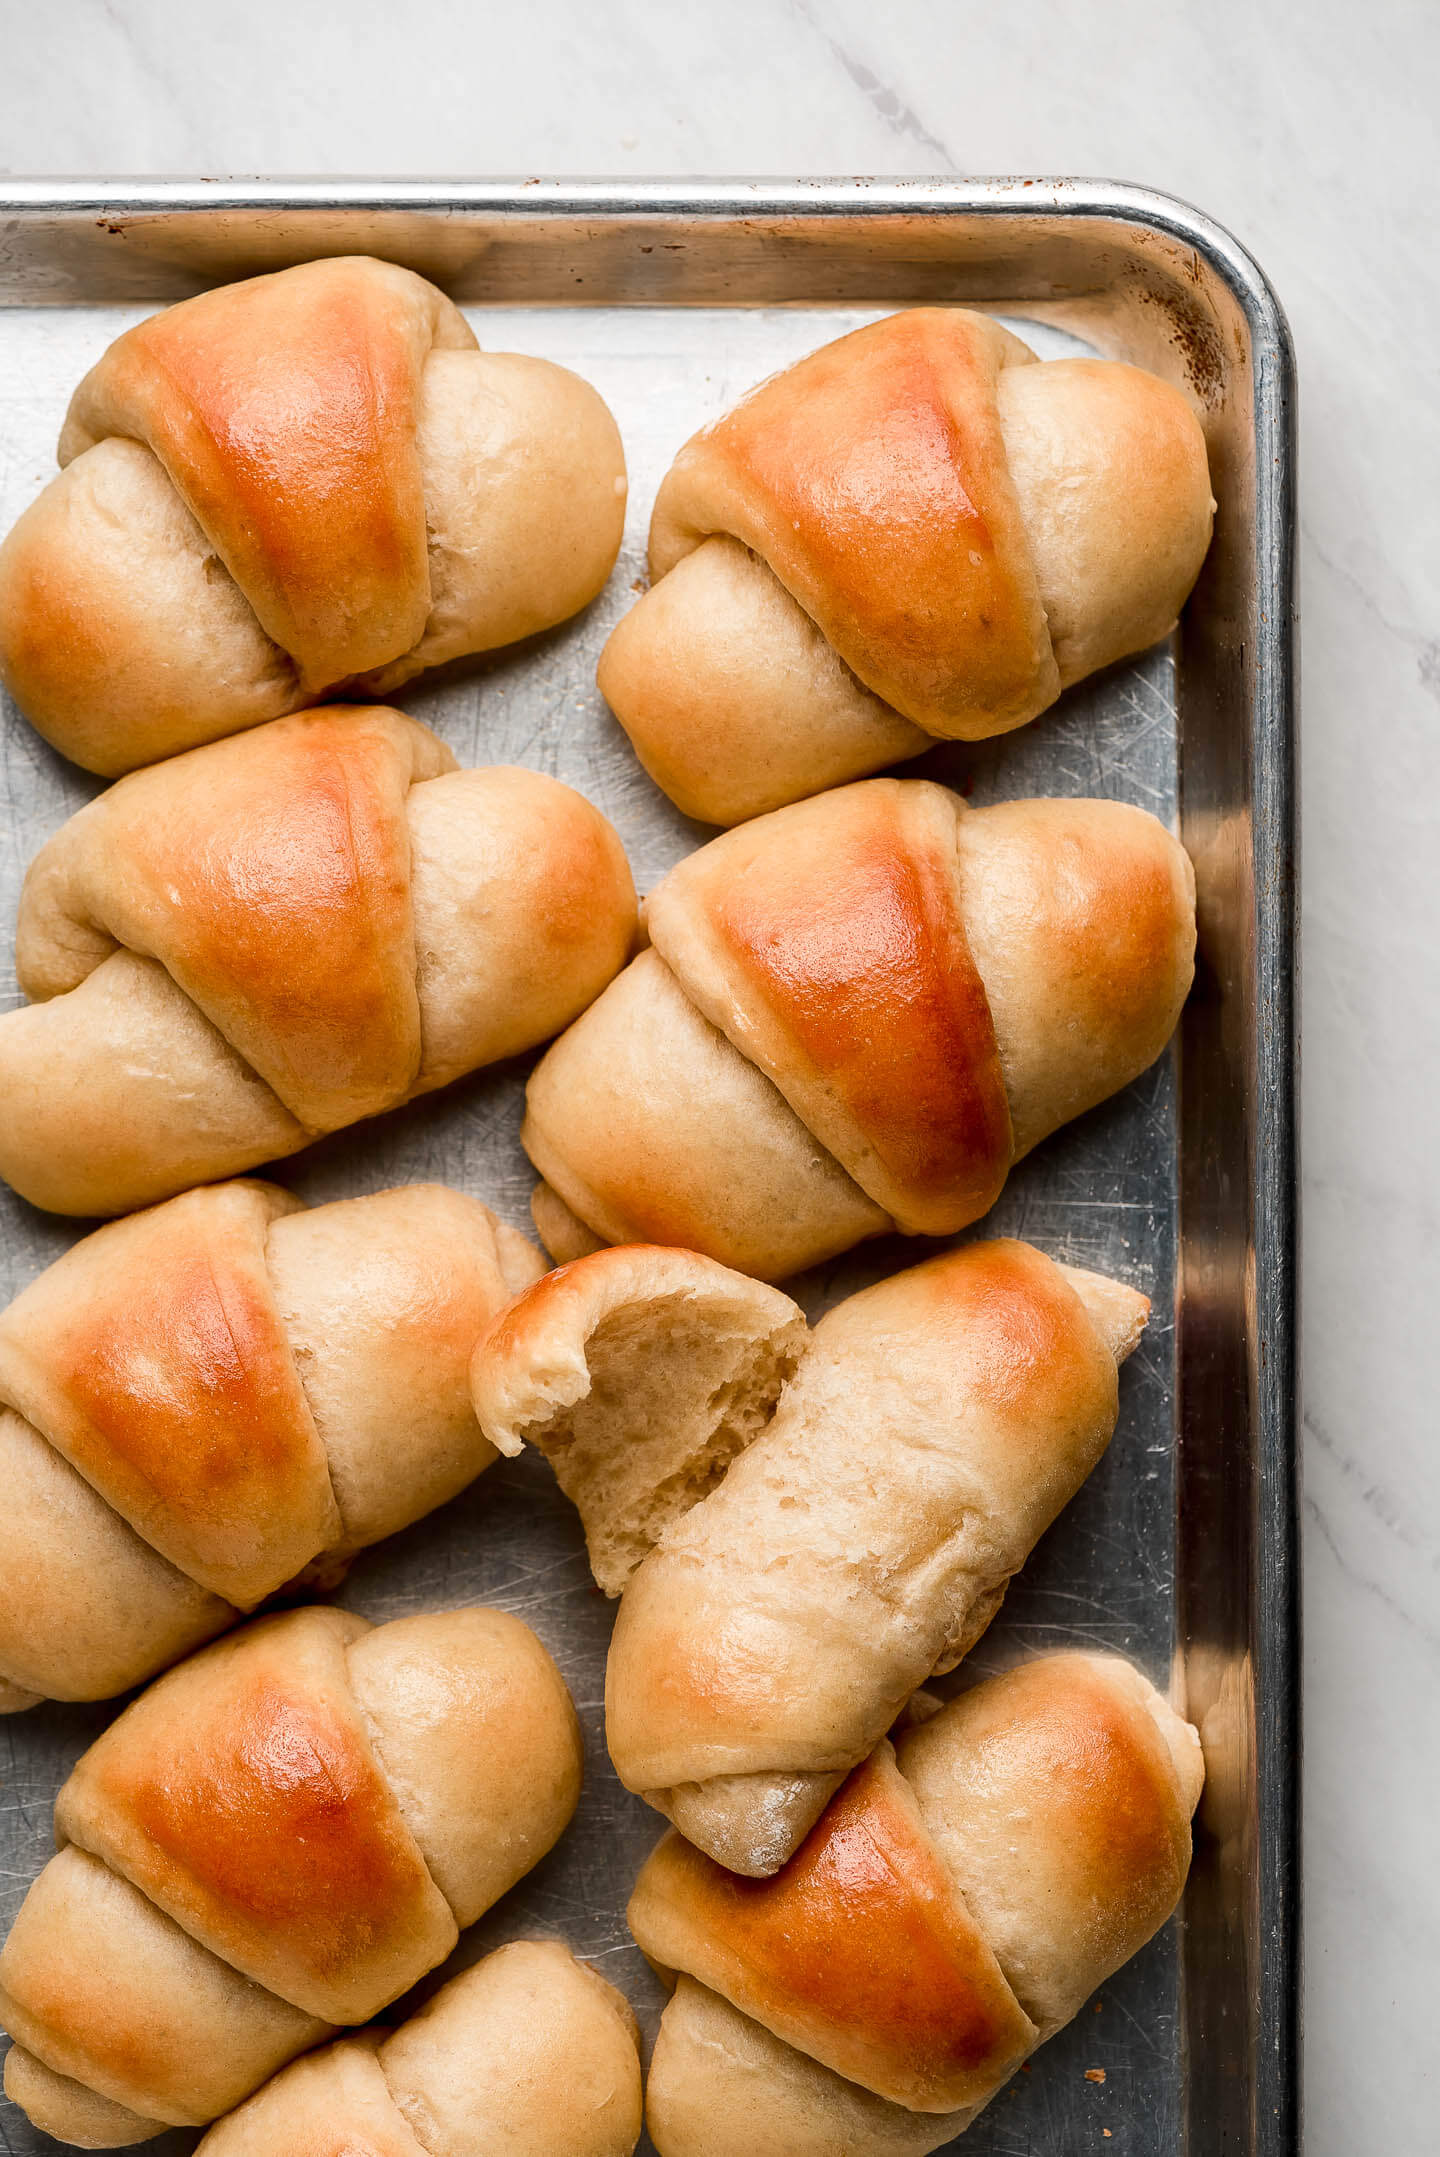 Homemade buttered Dinner Rolls lined up on a baking sheet with one pulled open to show fluffy interior.